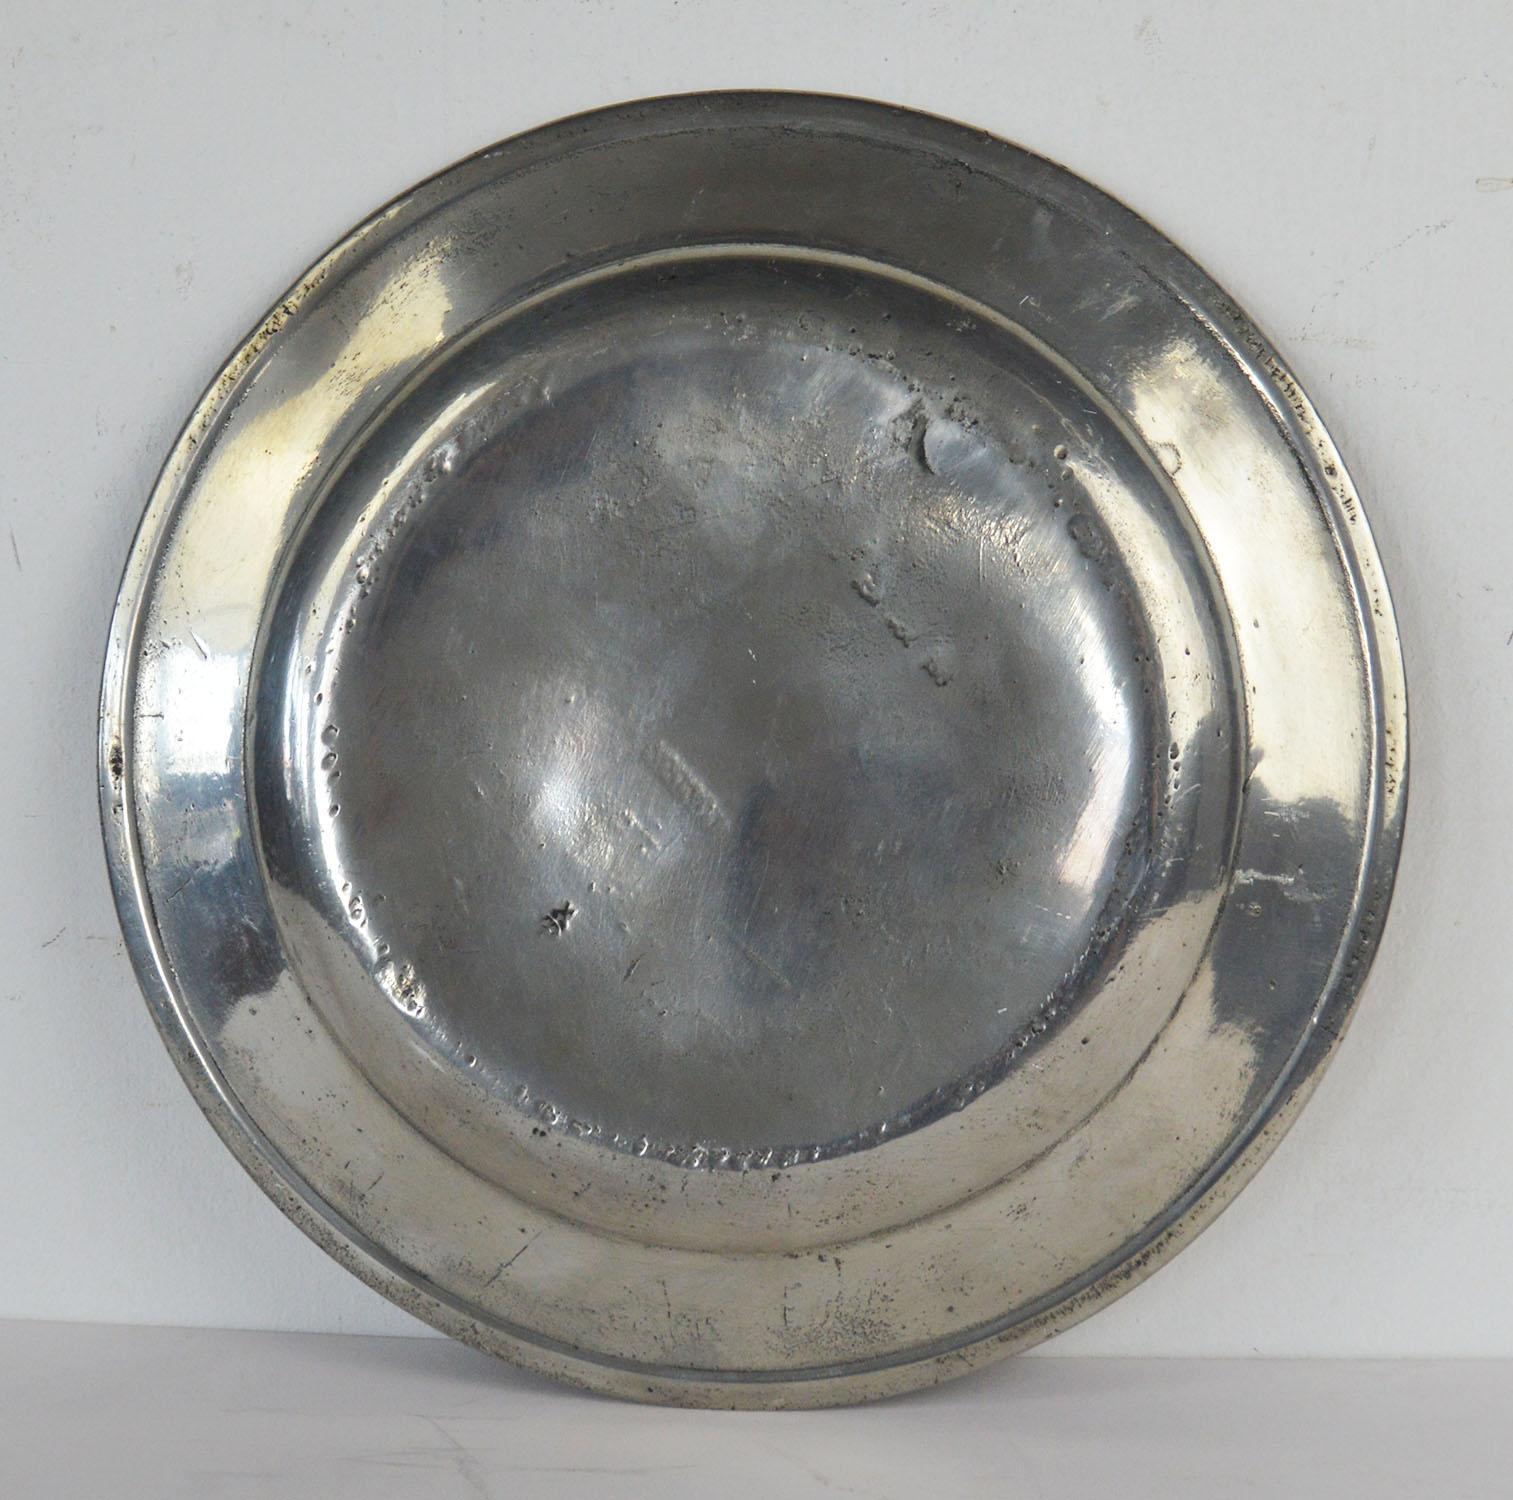 Pair of Antique Polished 9.5 inch Pewter Plates, English, 18th Century 1